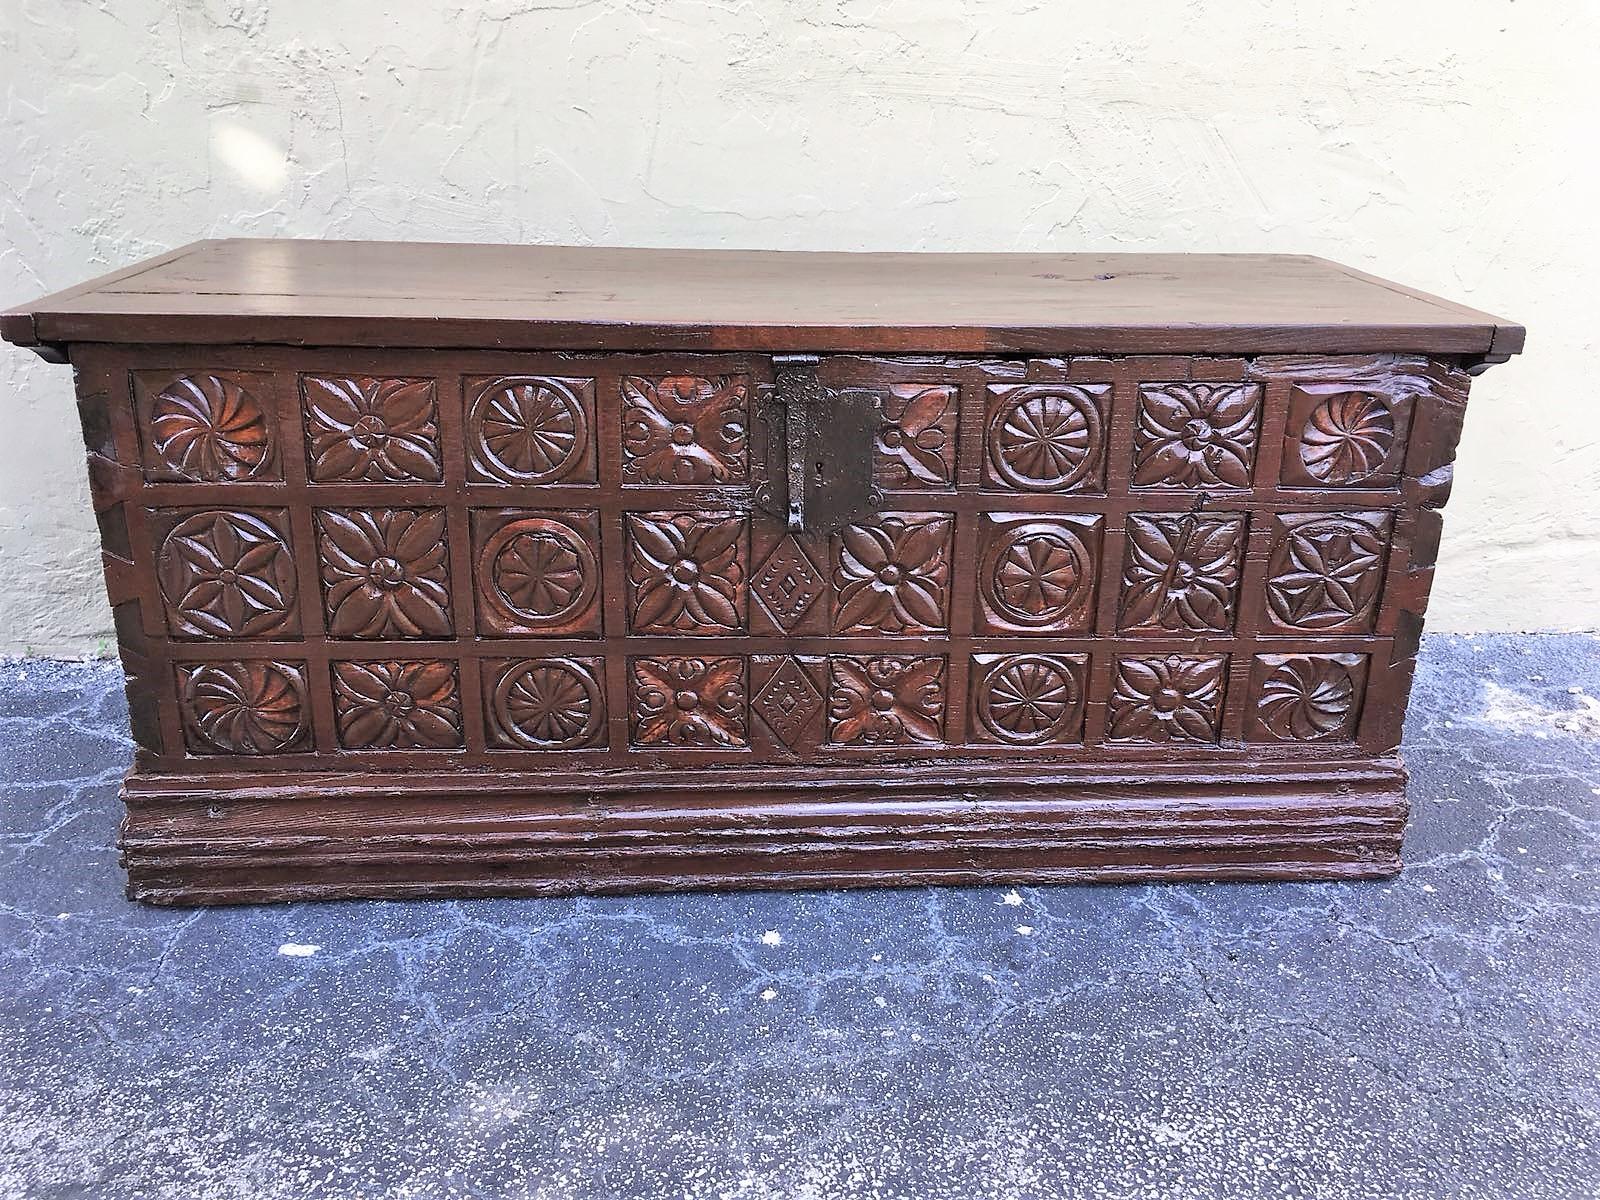 Nice 17th century chest in brown chesnut. Hand carved facade panel with geometrics decorations. Plinth with brace decorations, dovetail assembly with wrought iron wardware.
Add a real show stopper to your interior with this extremely large English